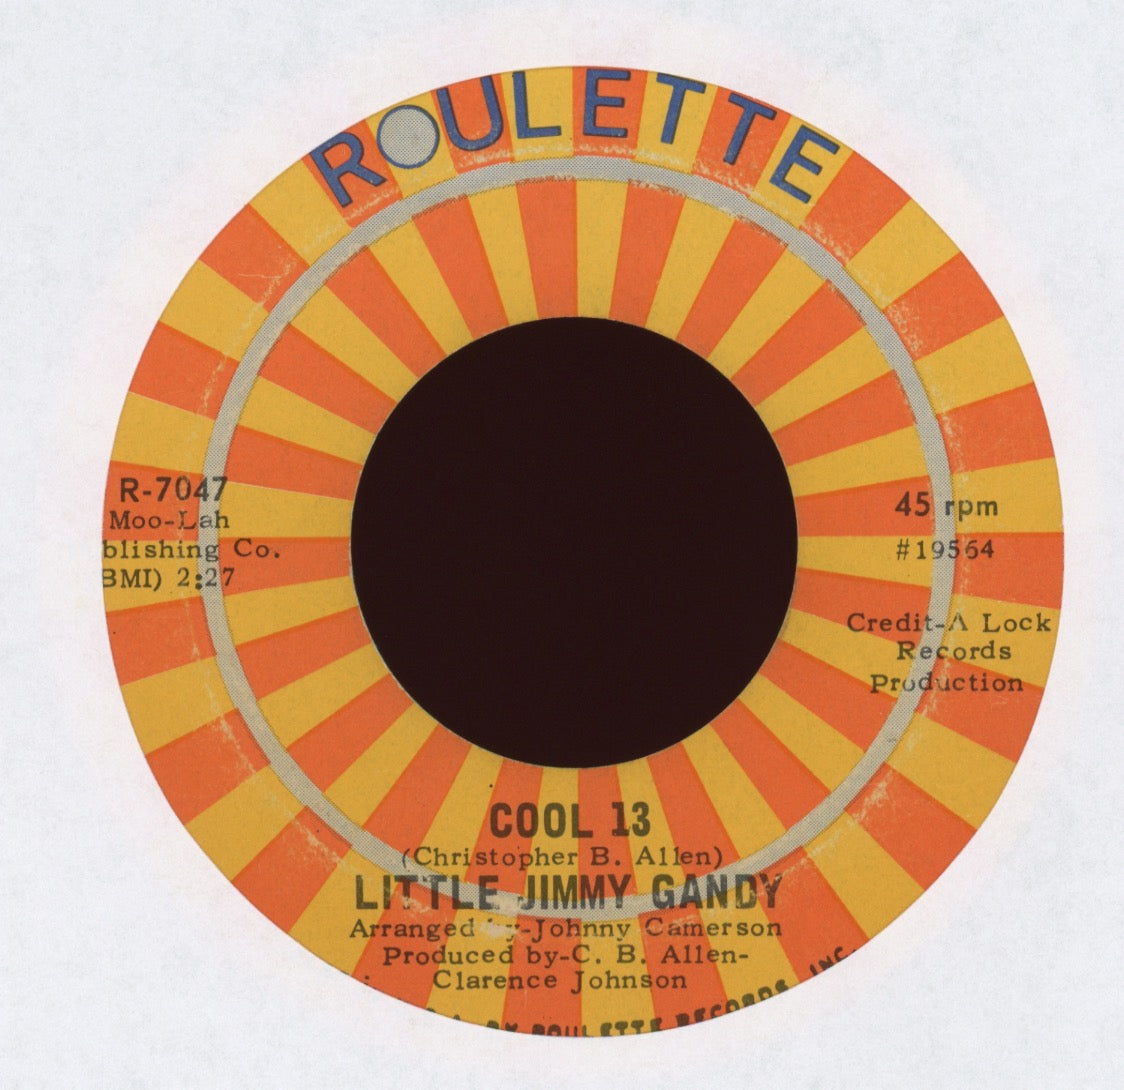 Little Jimmy Gandy - I'm Not Like The Others on Roulette